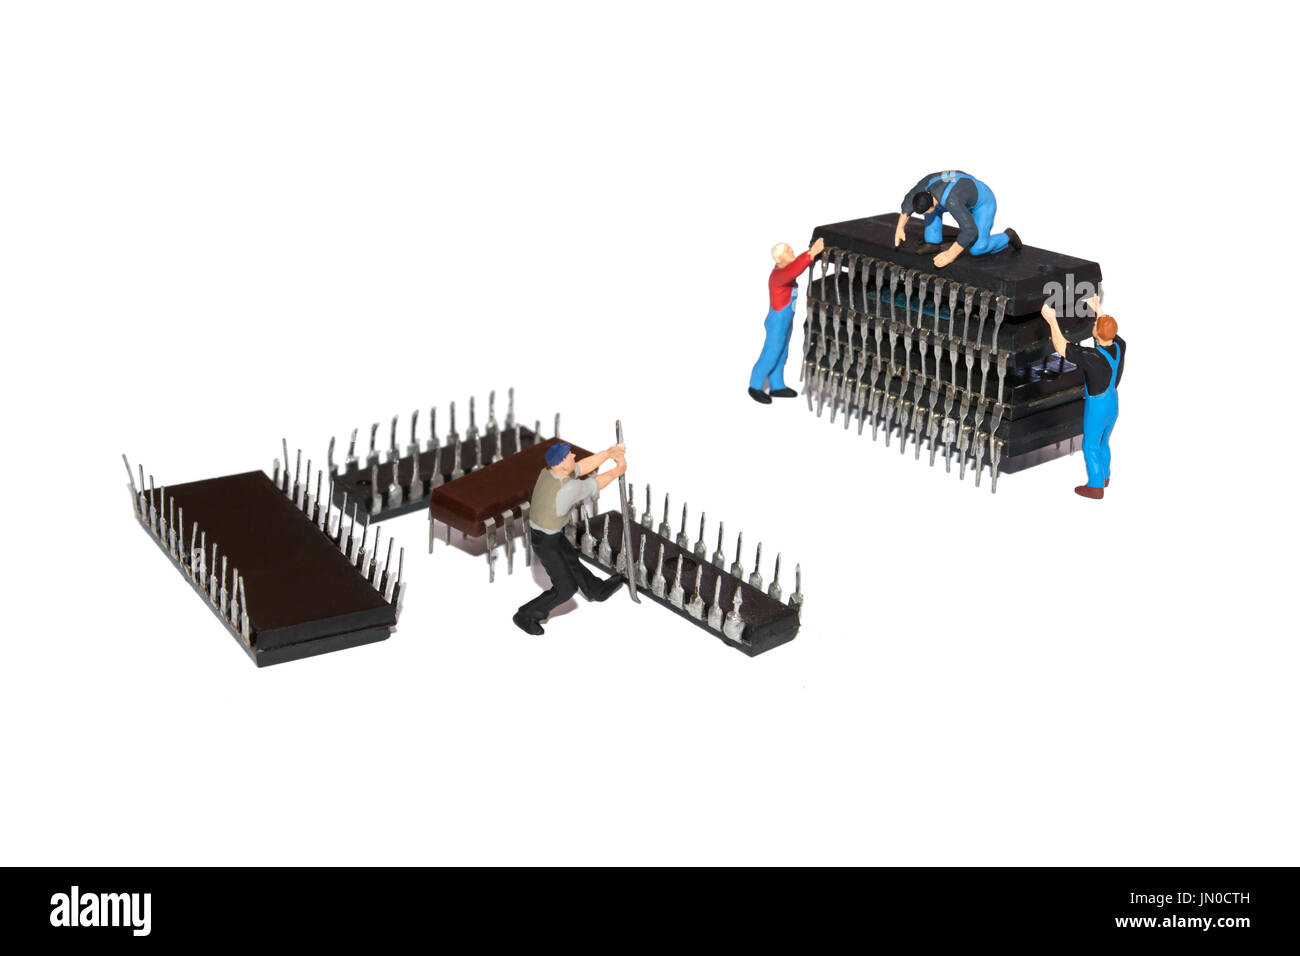 Creative concept with Miniature people. Team workers and microchips. Repair of machinery Stock Photo